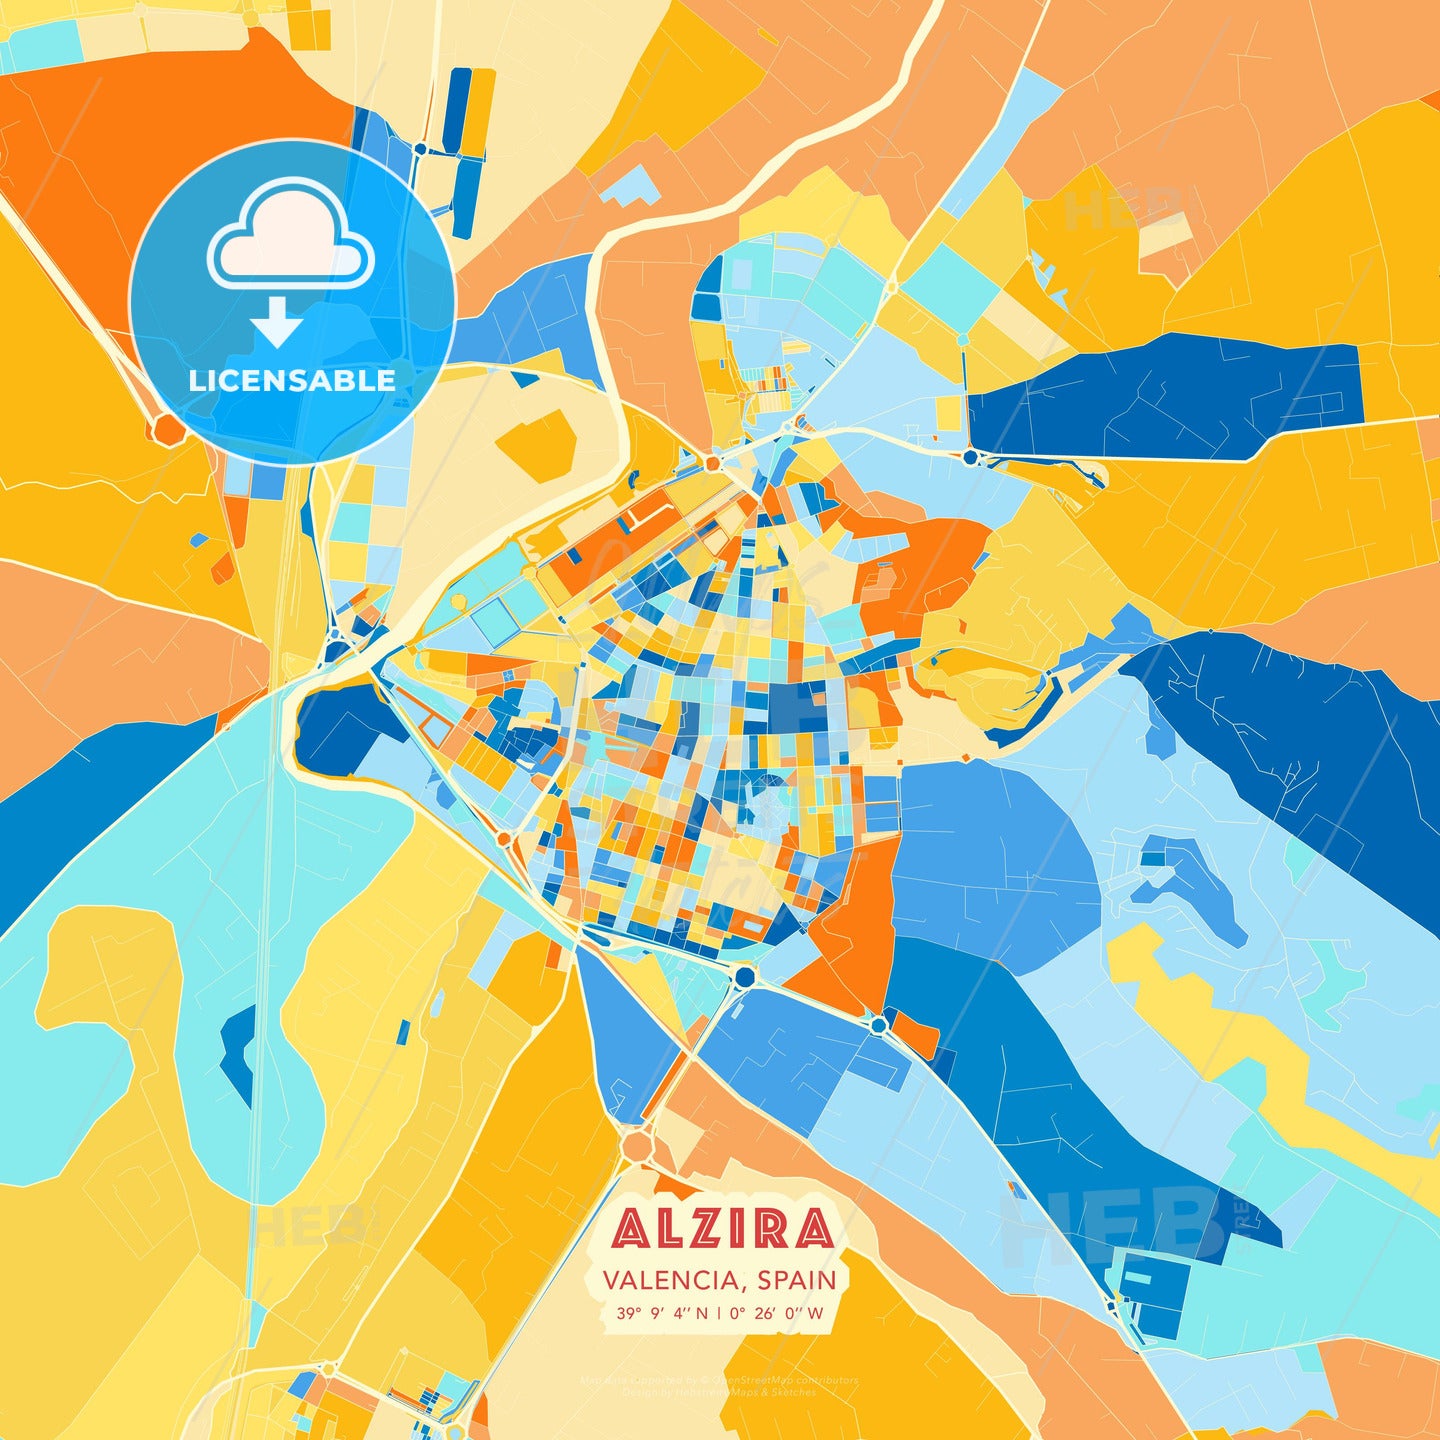 Alzira, Valencia, Spain, map - HEBSTREITS Sketches